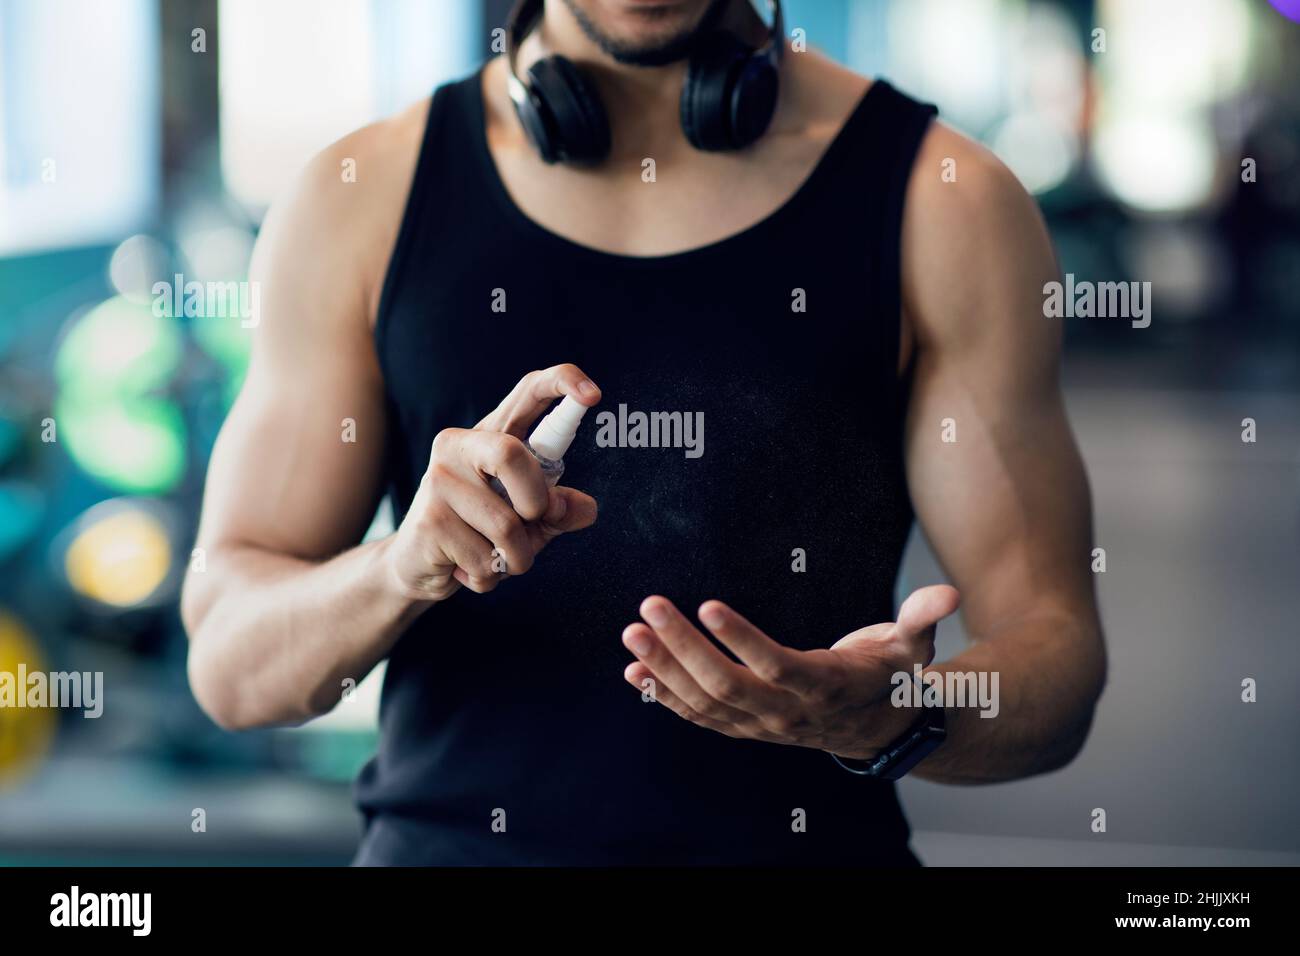 Unrecognizable Muscular Man Applying Disinfectant Spray On Hands Before Training At Gym Stock Photo